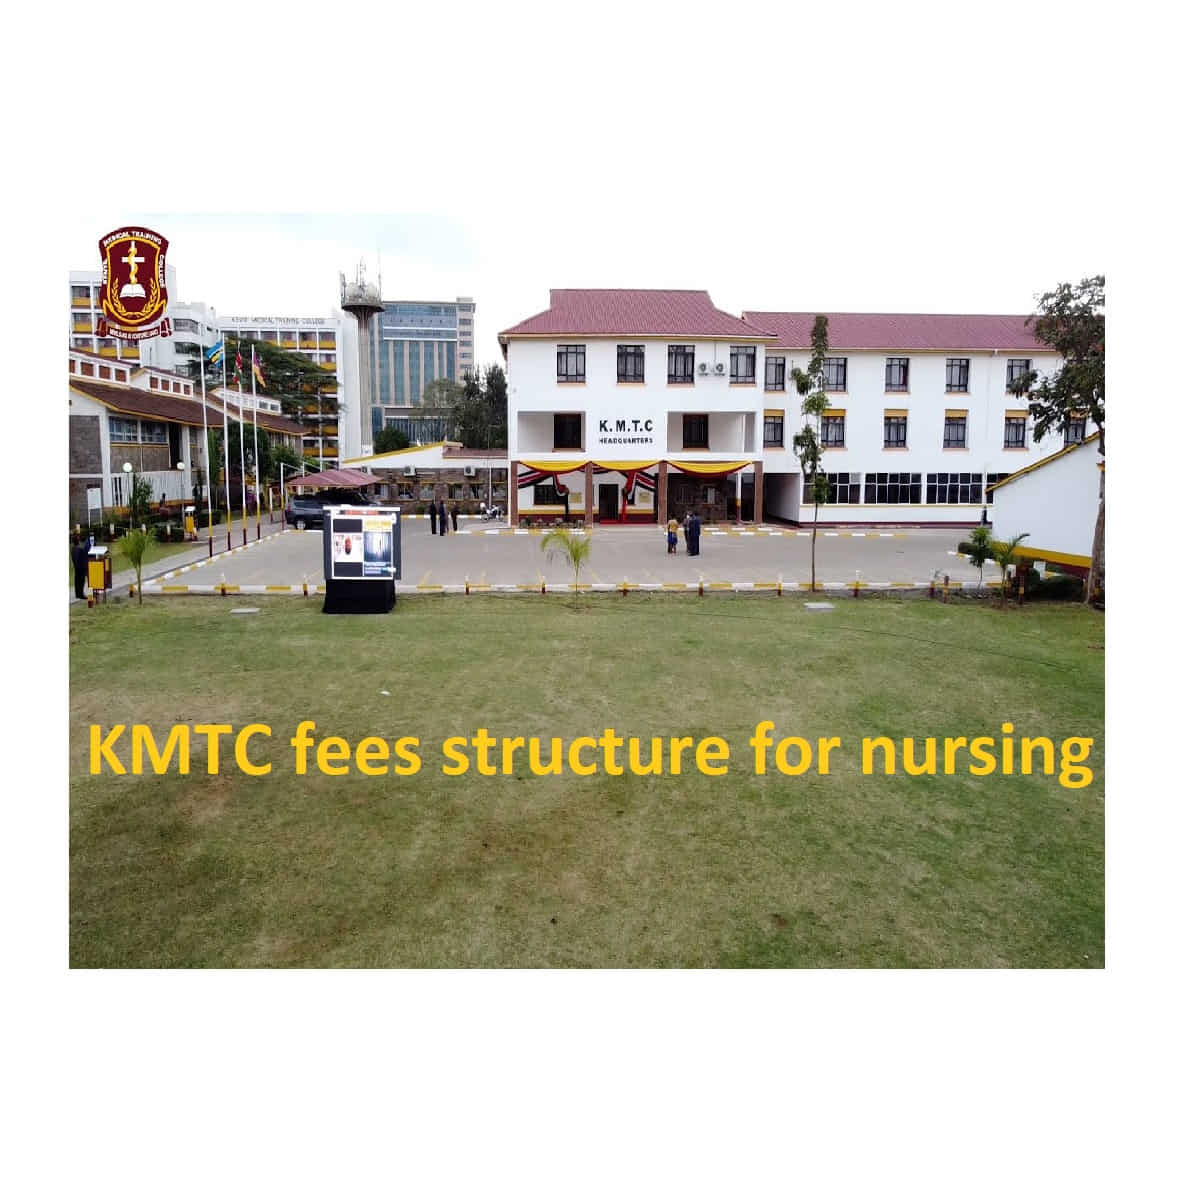 KMTC fees structure for nursing